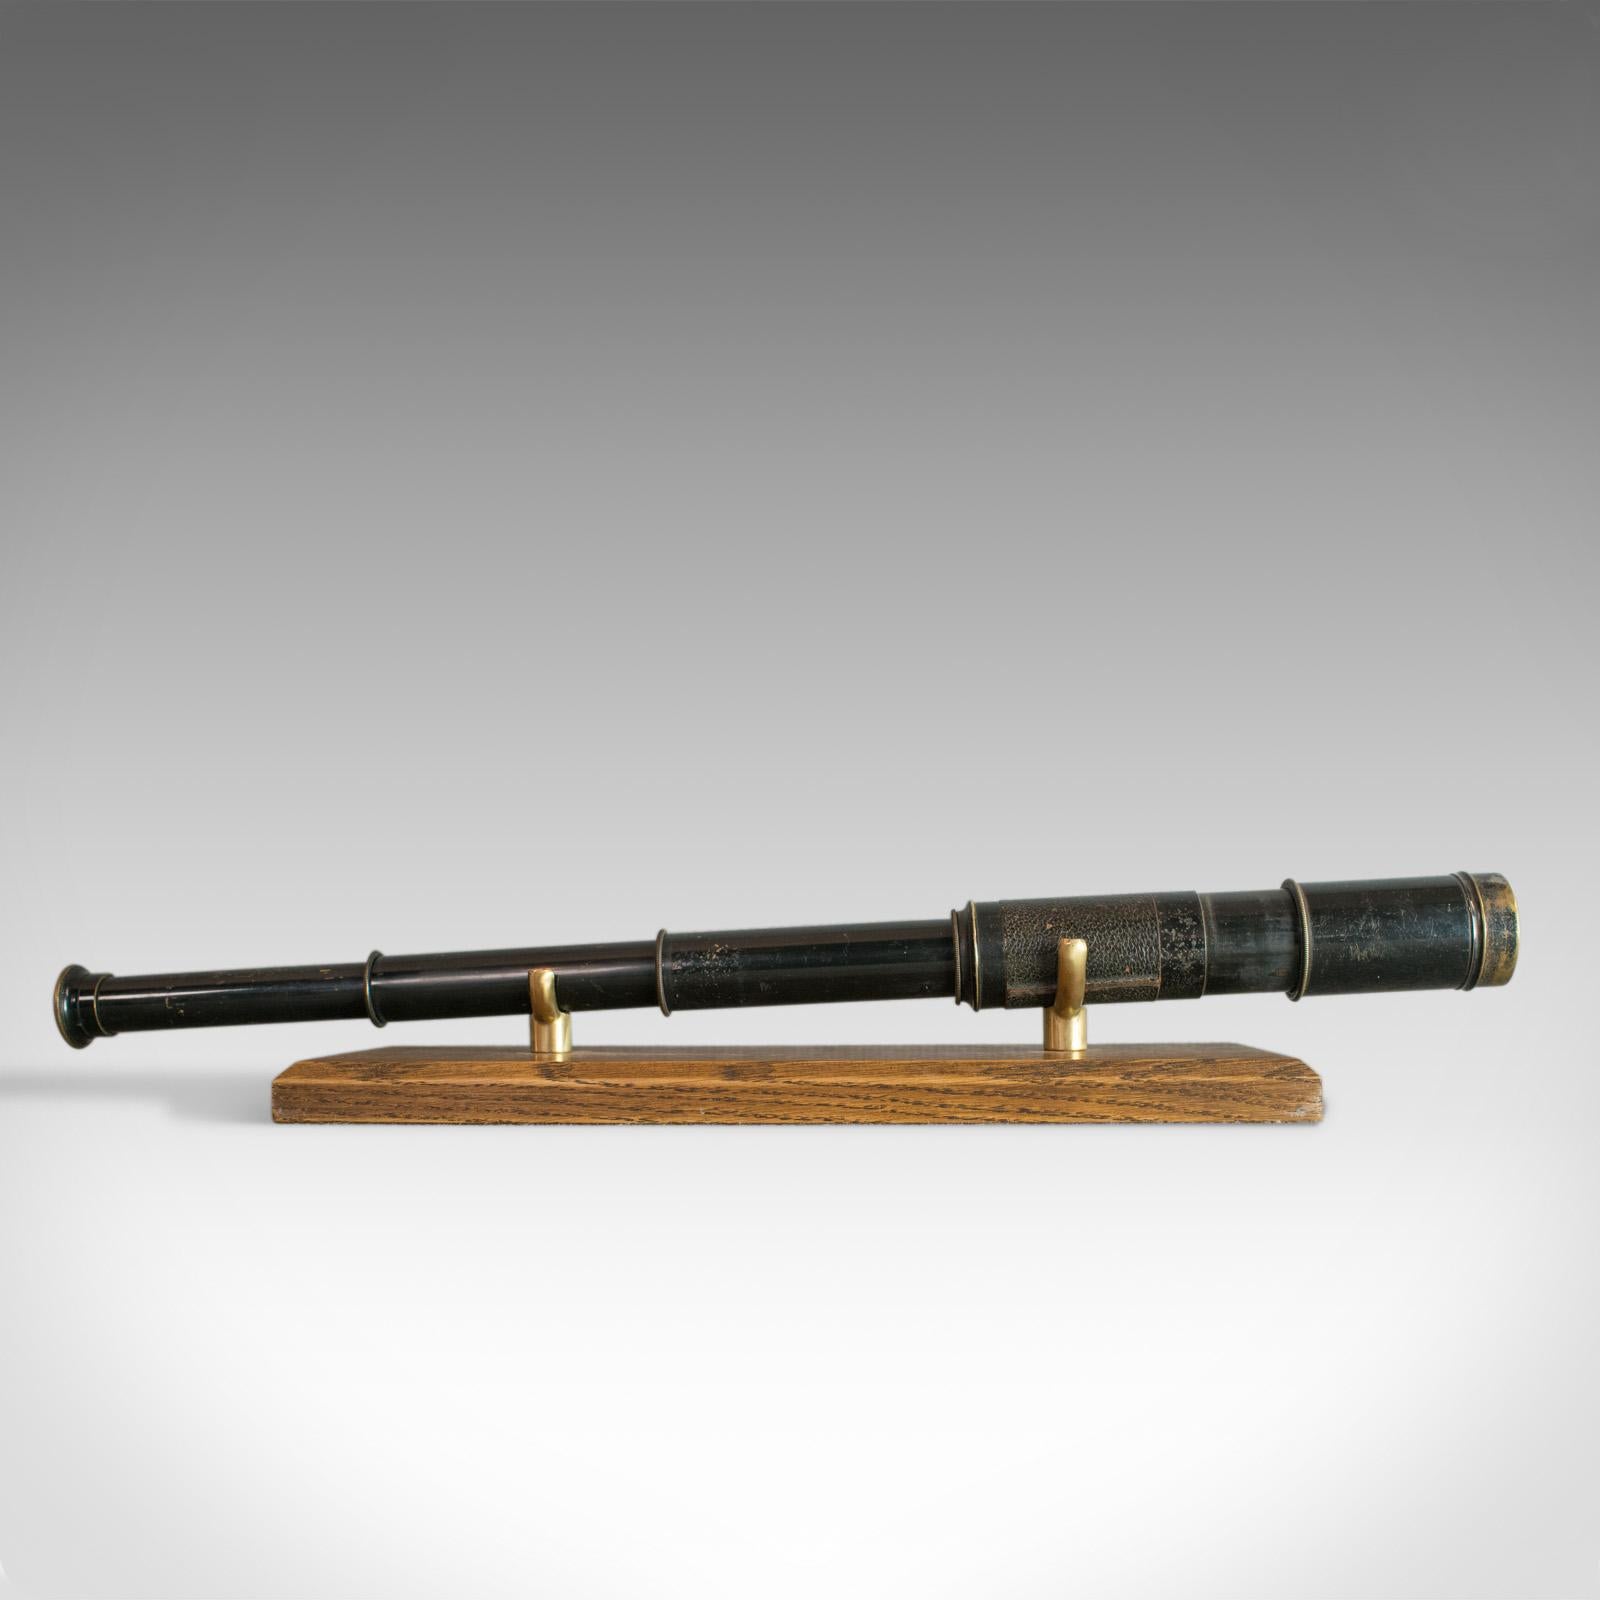 This is an antique pocket telescope, a three draw refractor for terrestrial or astronomical use. An English Edwardian scope dating to the early 20th century circa 1910.

Perfect for bird watching, landscape appreciation, wildlife, or maritime